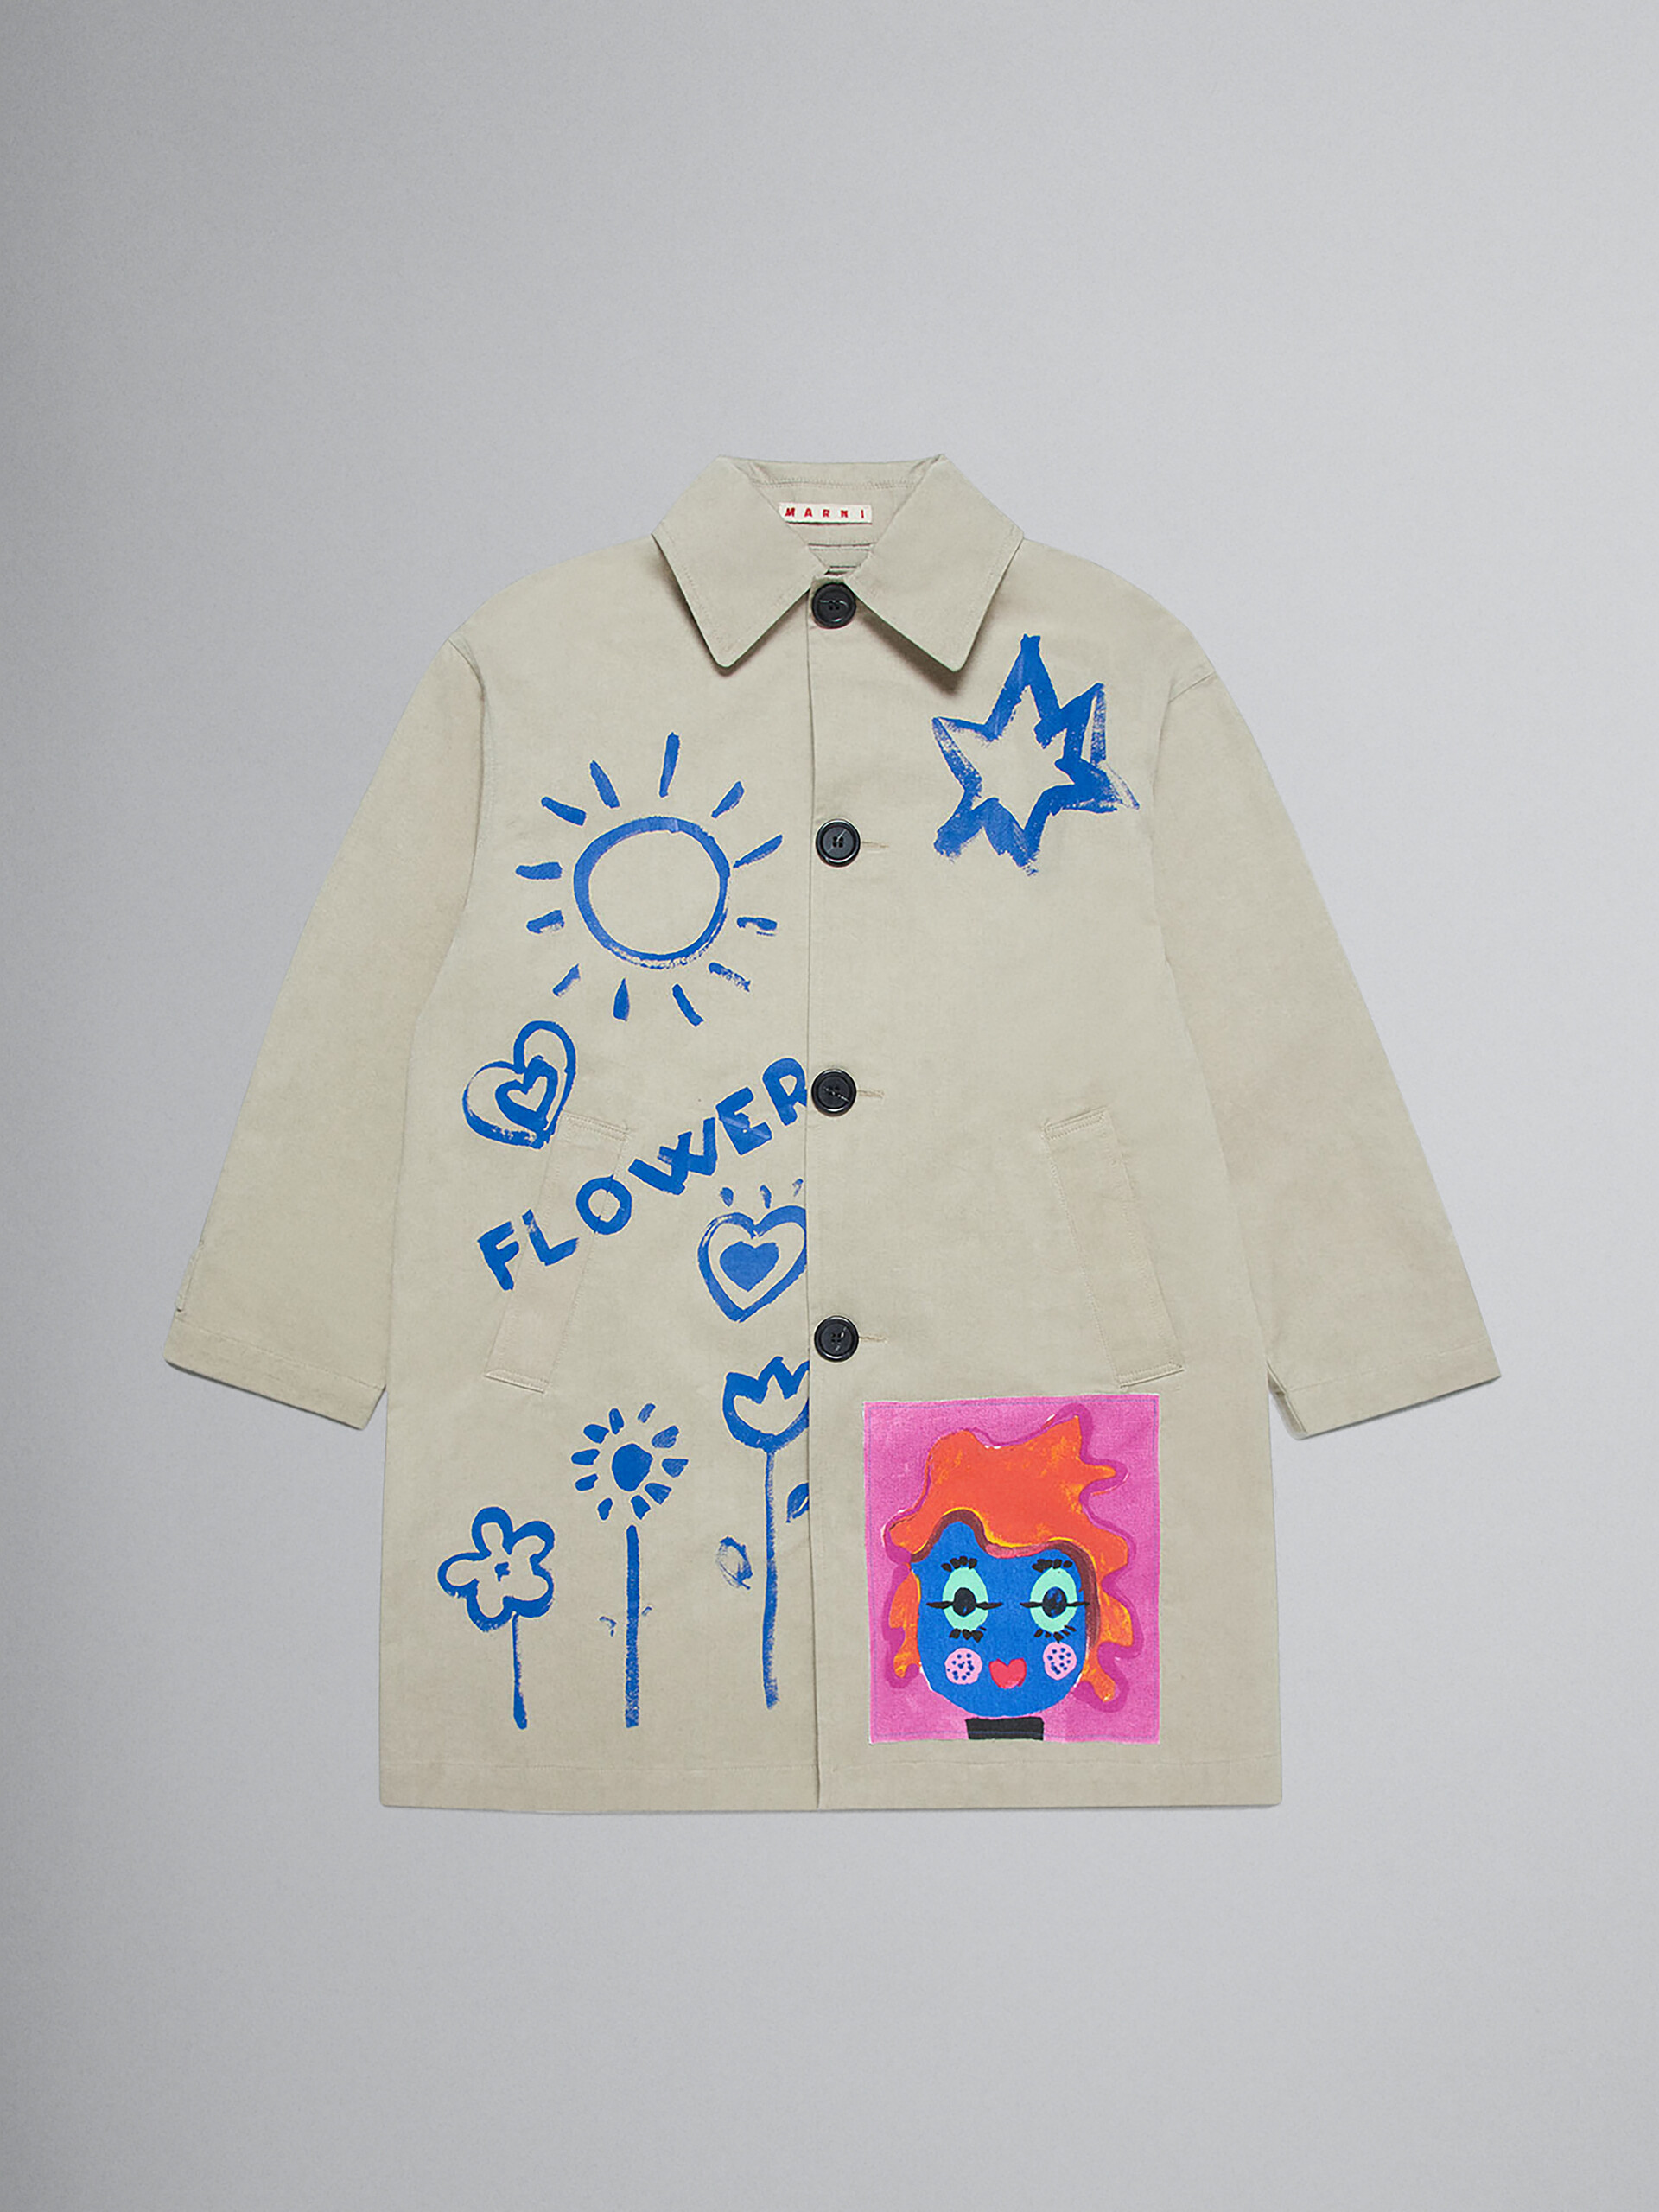 Beige gabardine coat with graffiti and printed faces - Jackets - Image 1